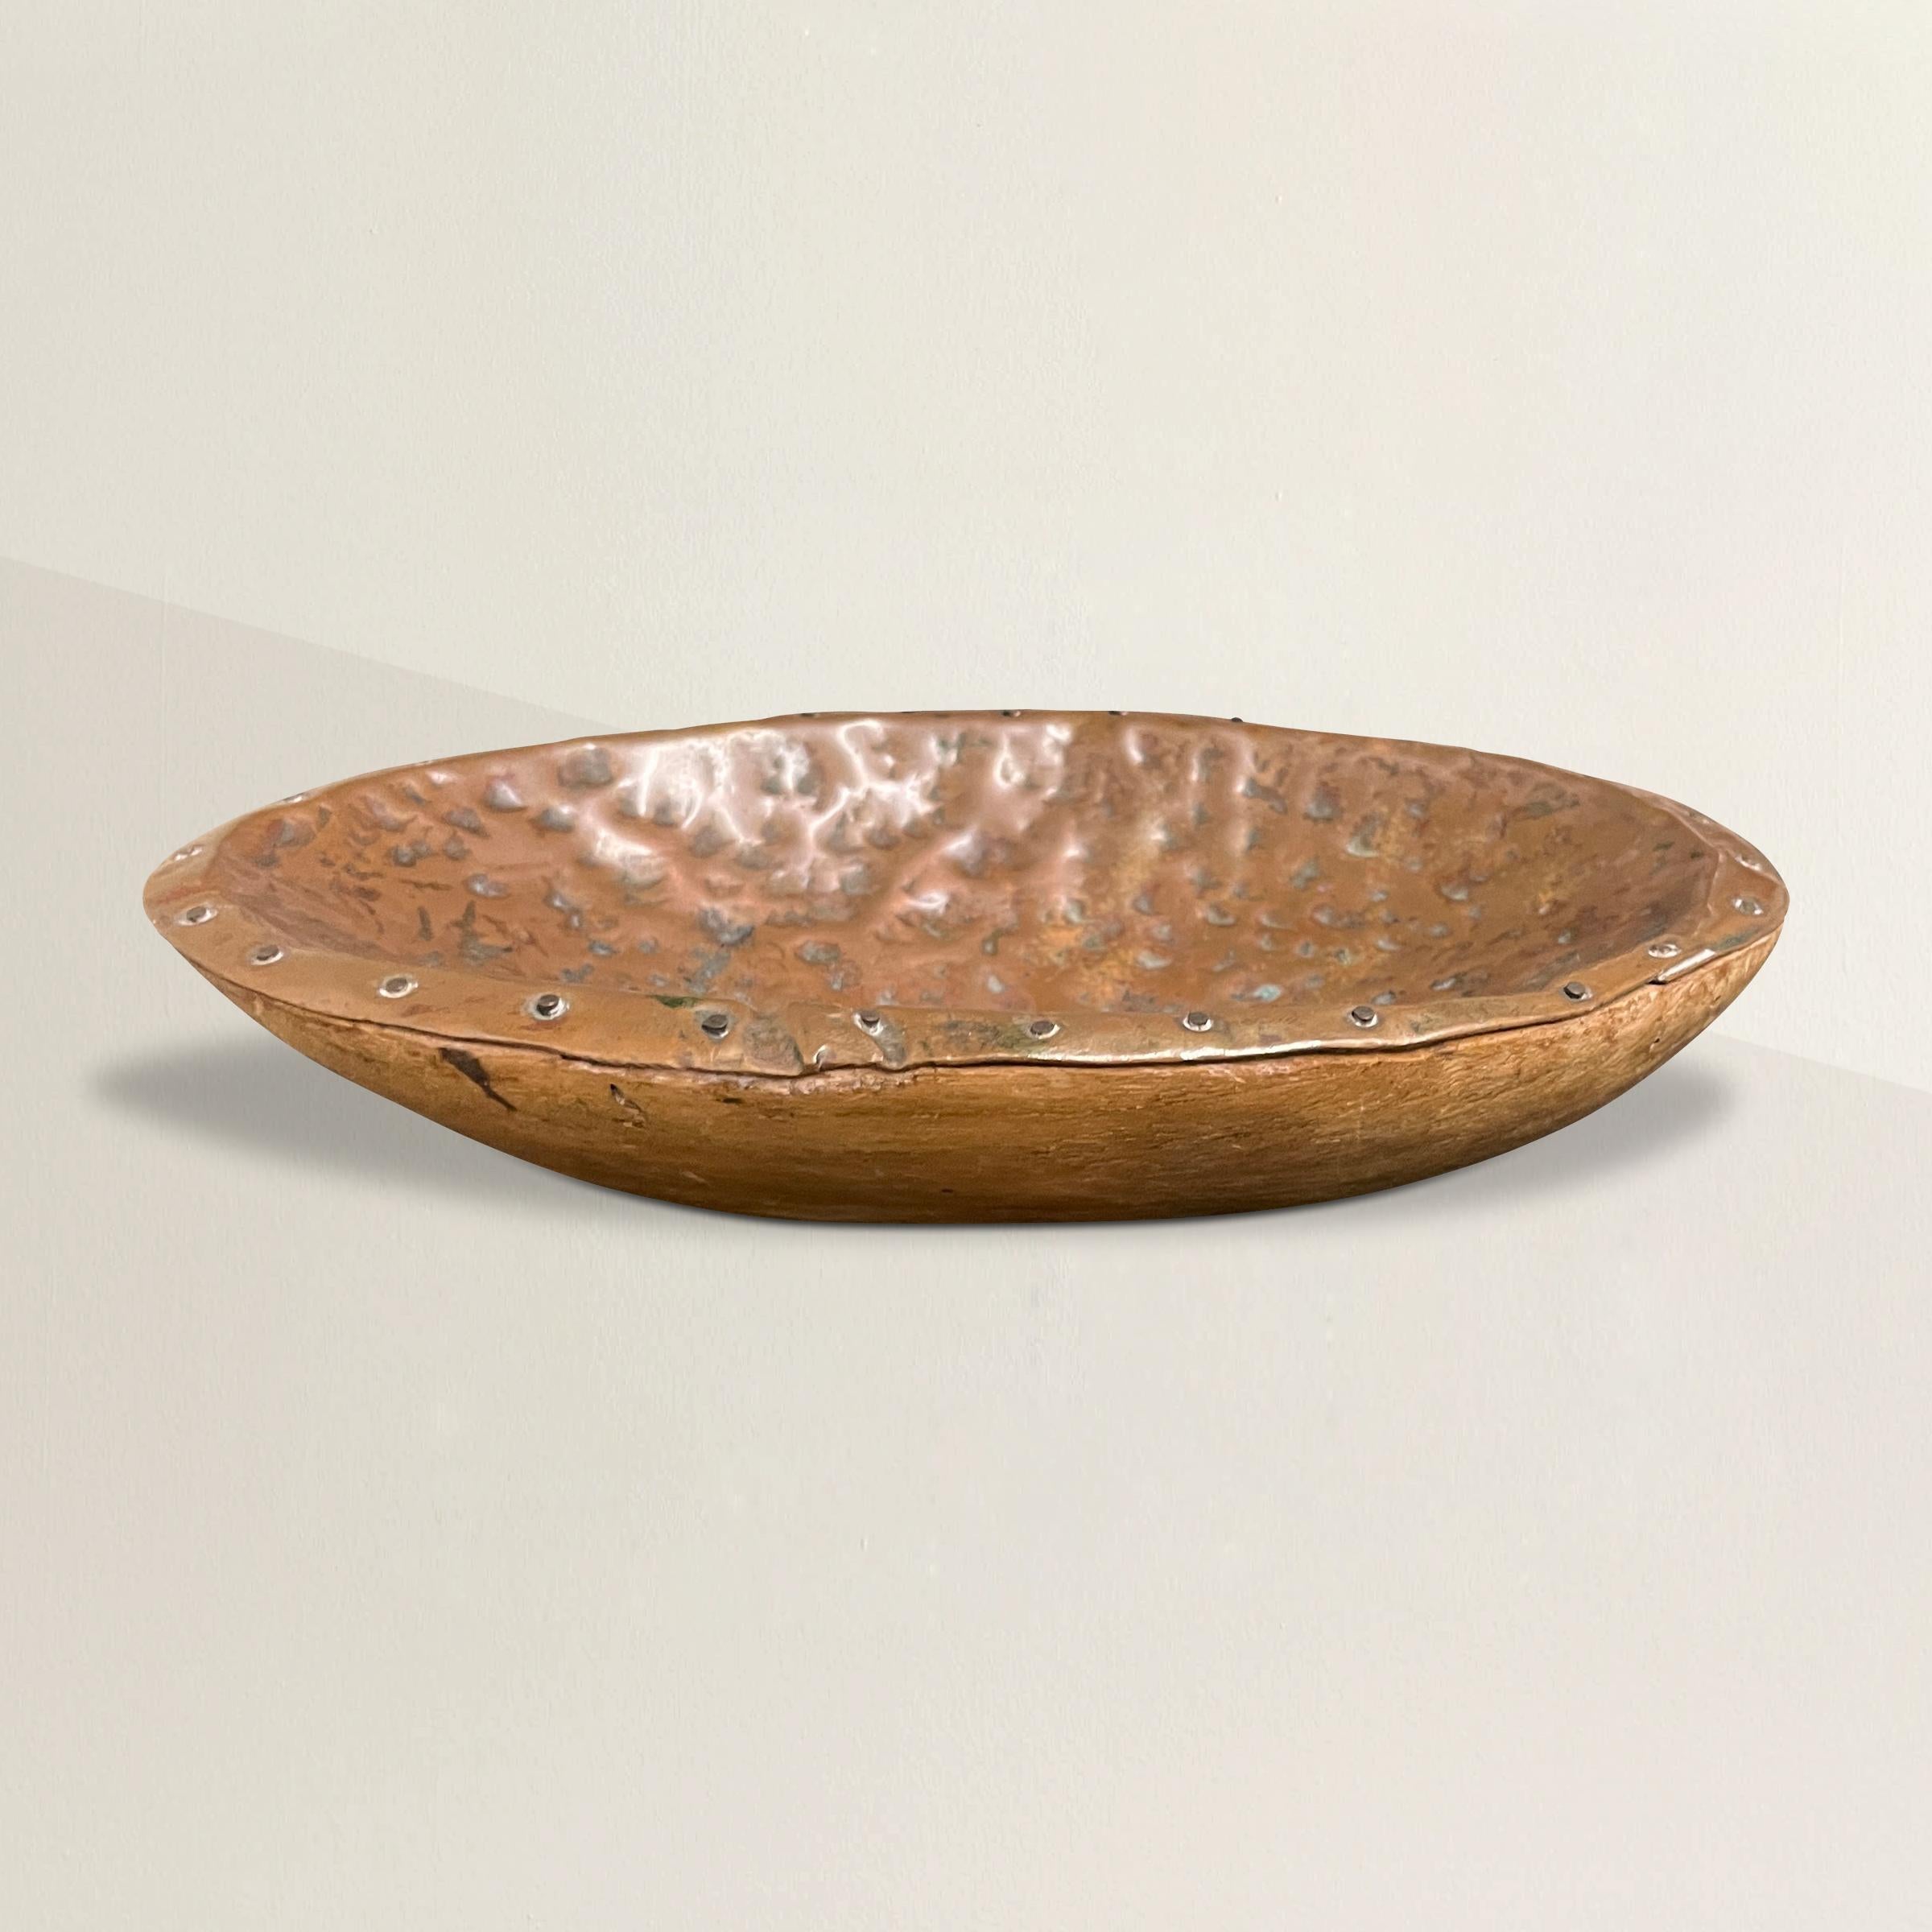 A quirky yet charming 20th century crudely hammered copper lined wood bowl with a wonderful texture. Perfect for catching your keys on your entry console, or holding your glasses on your nightstand.